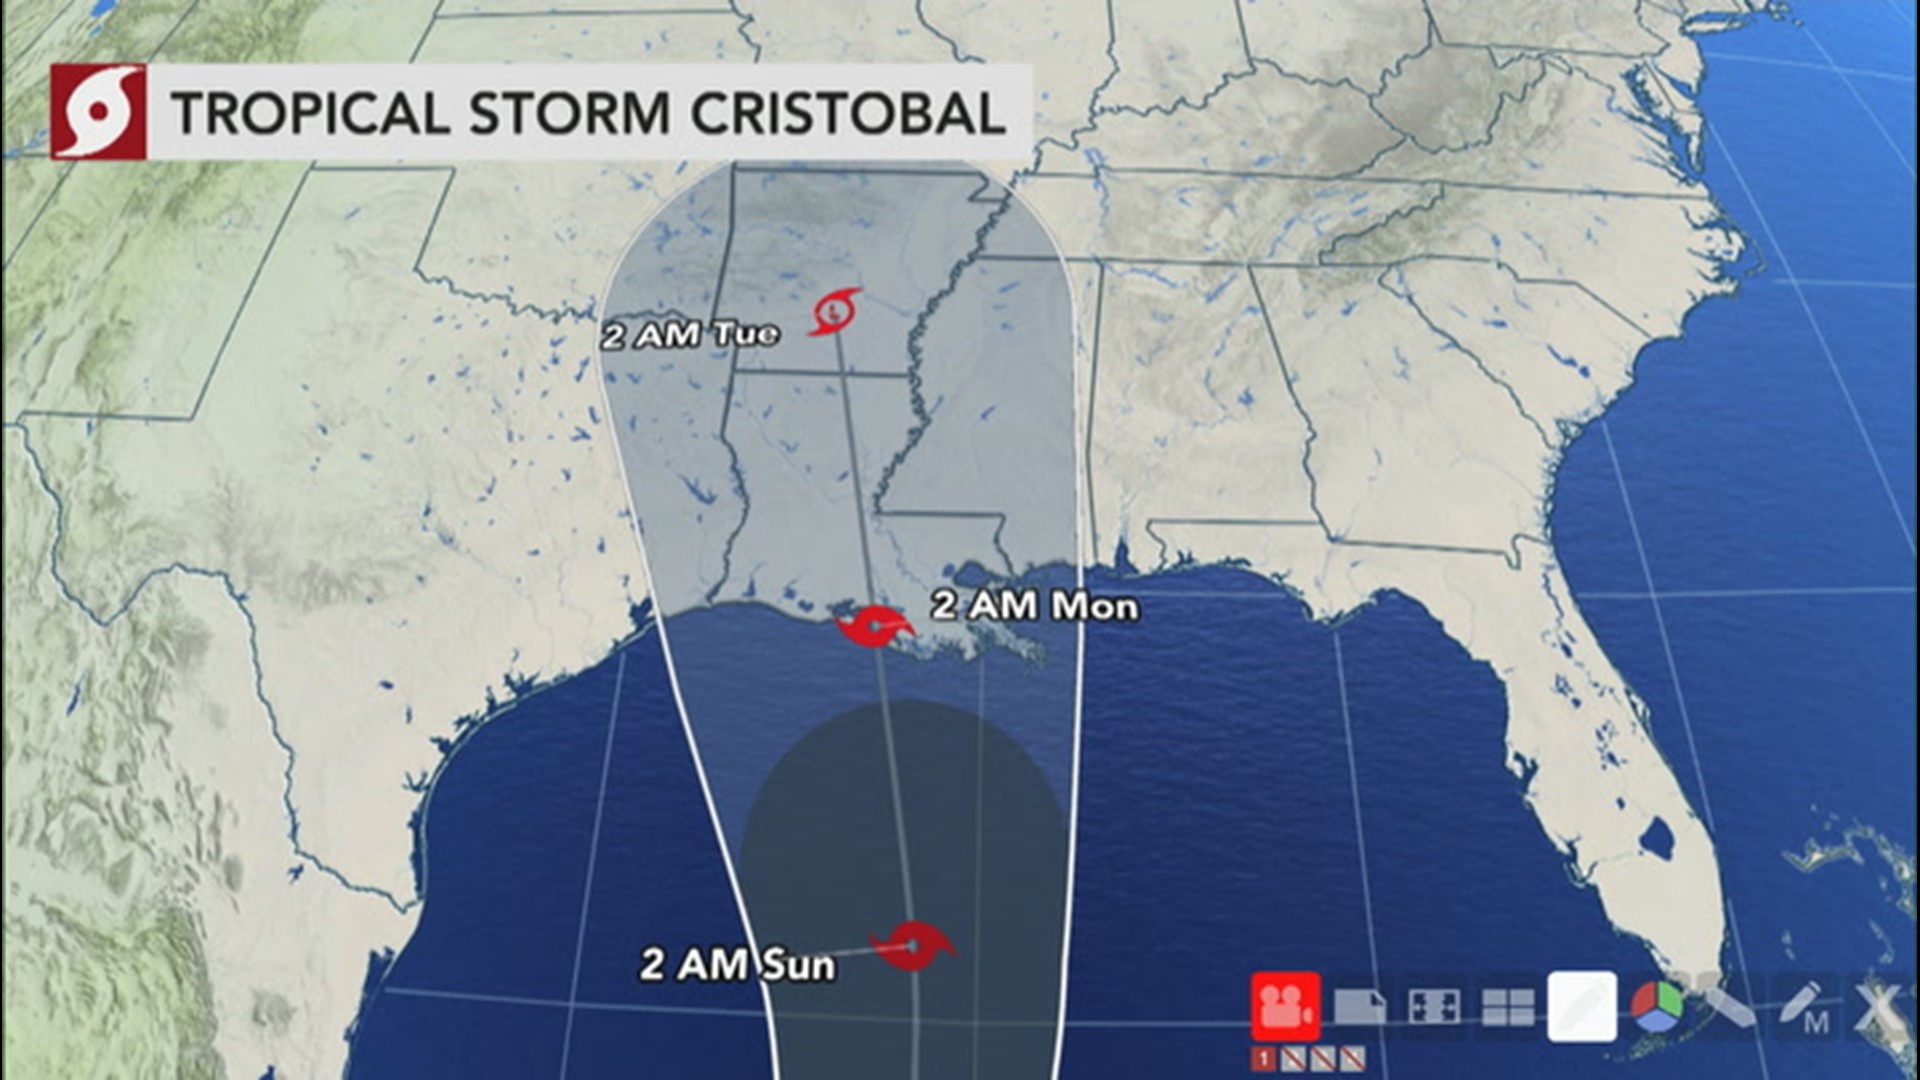 Bernie Rayno breaks down the different scenarios for where Cristobal could make landfall in the U.S.